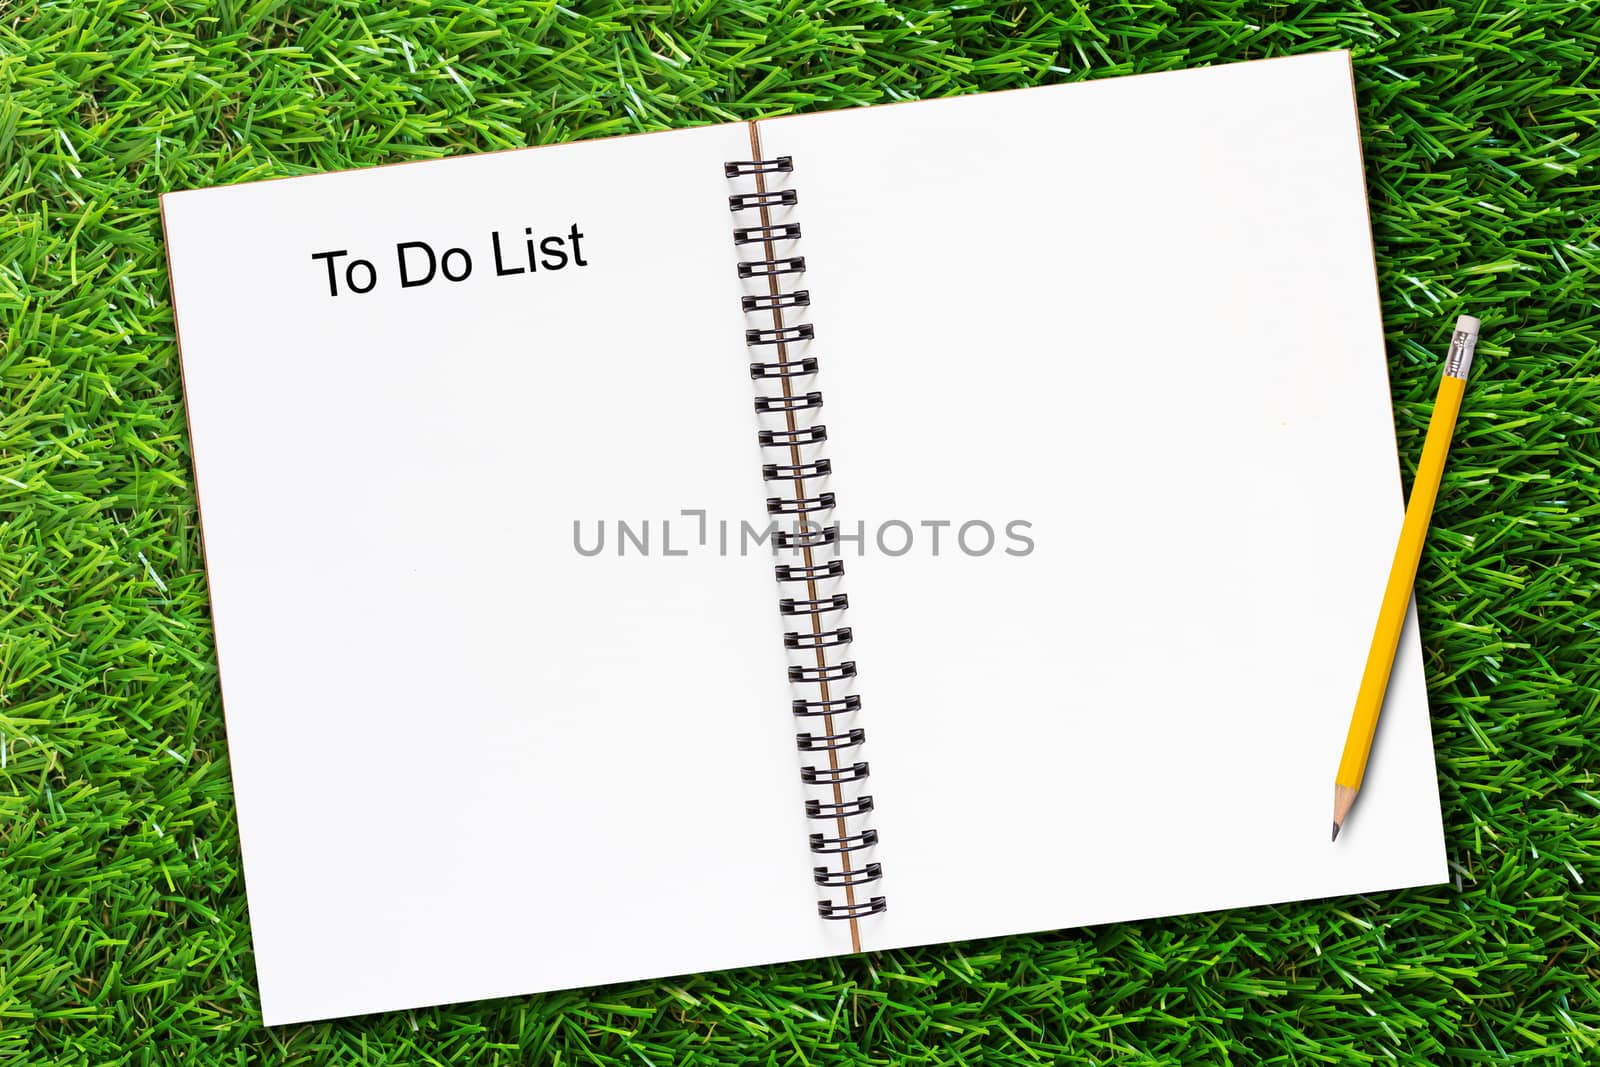 To Do List Concept by Fnatic12